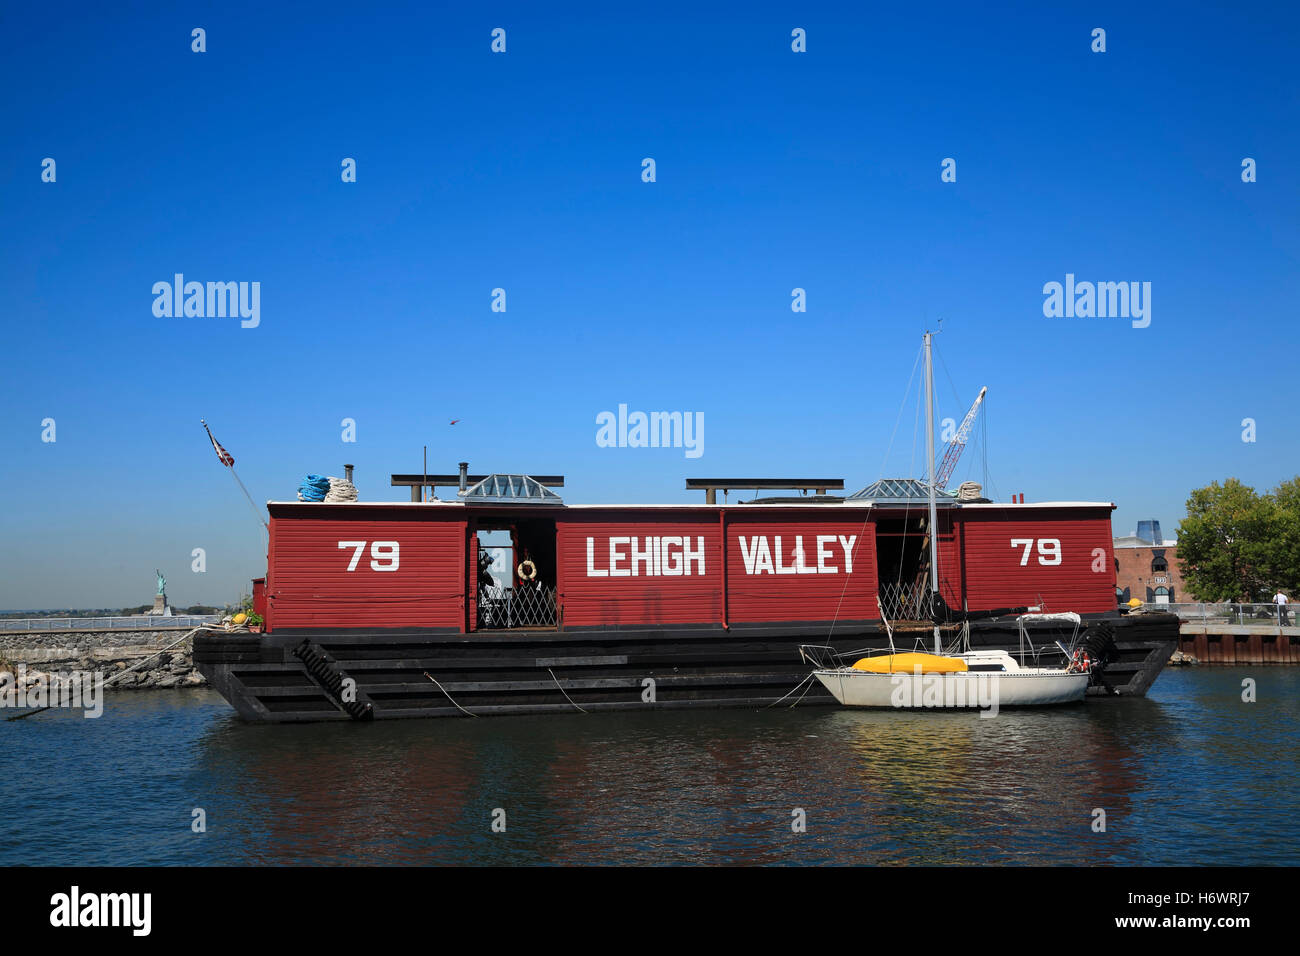 Lehigh Valley 79, Barge Waterfront Museum, Red Hook, Brooklyn, New York, USA Stockfoto